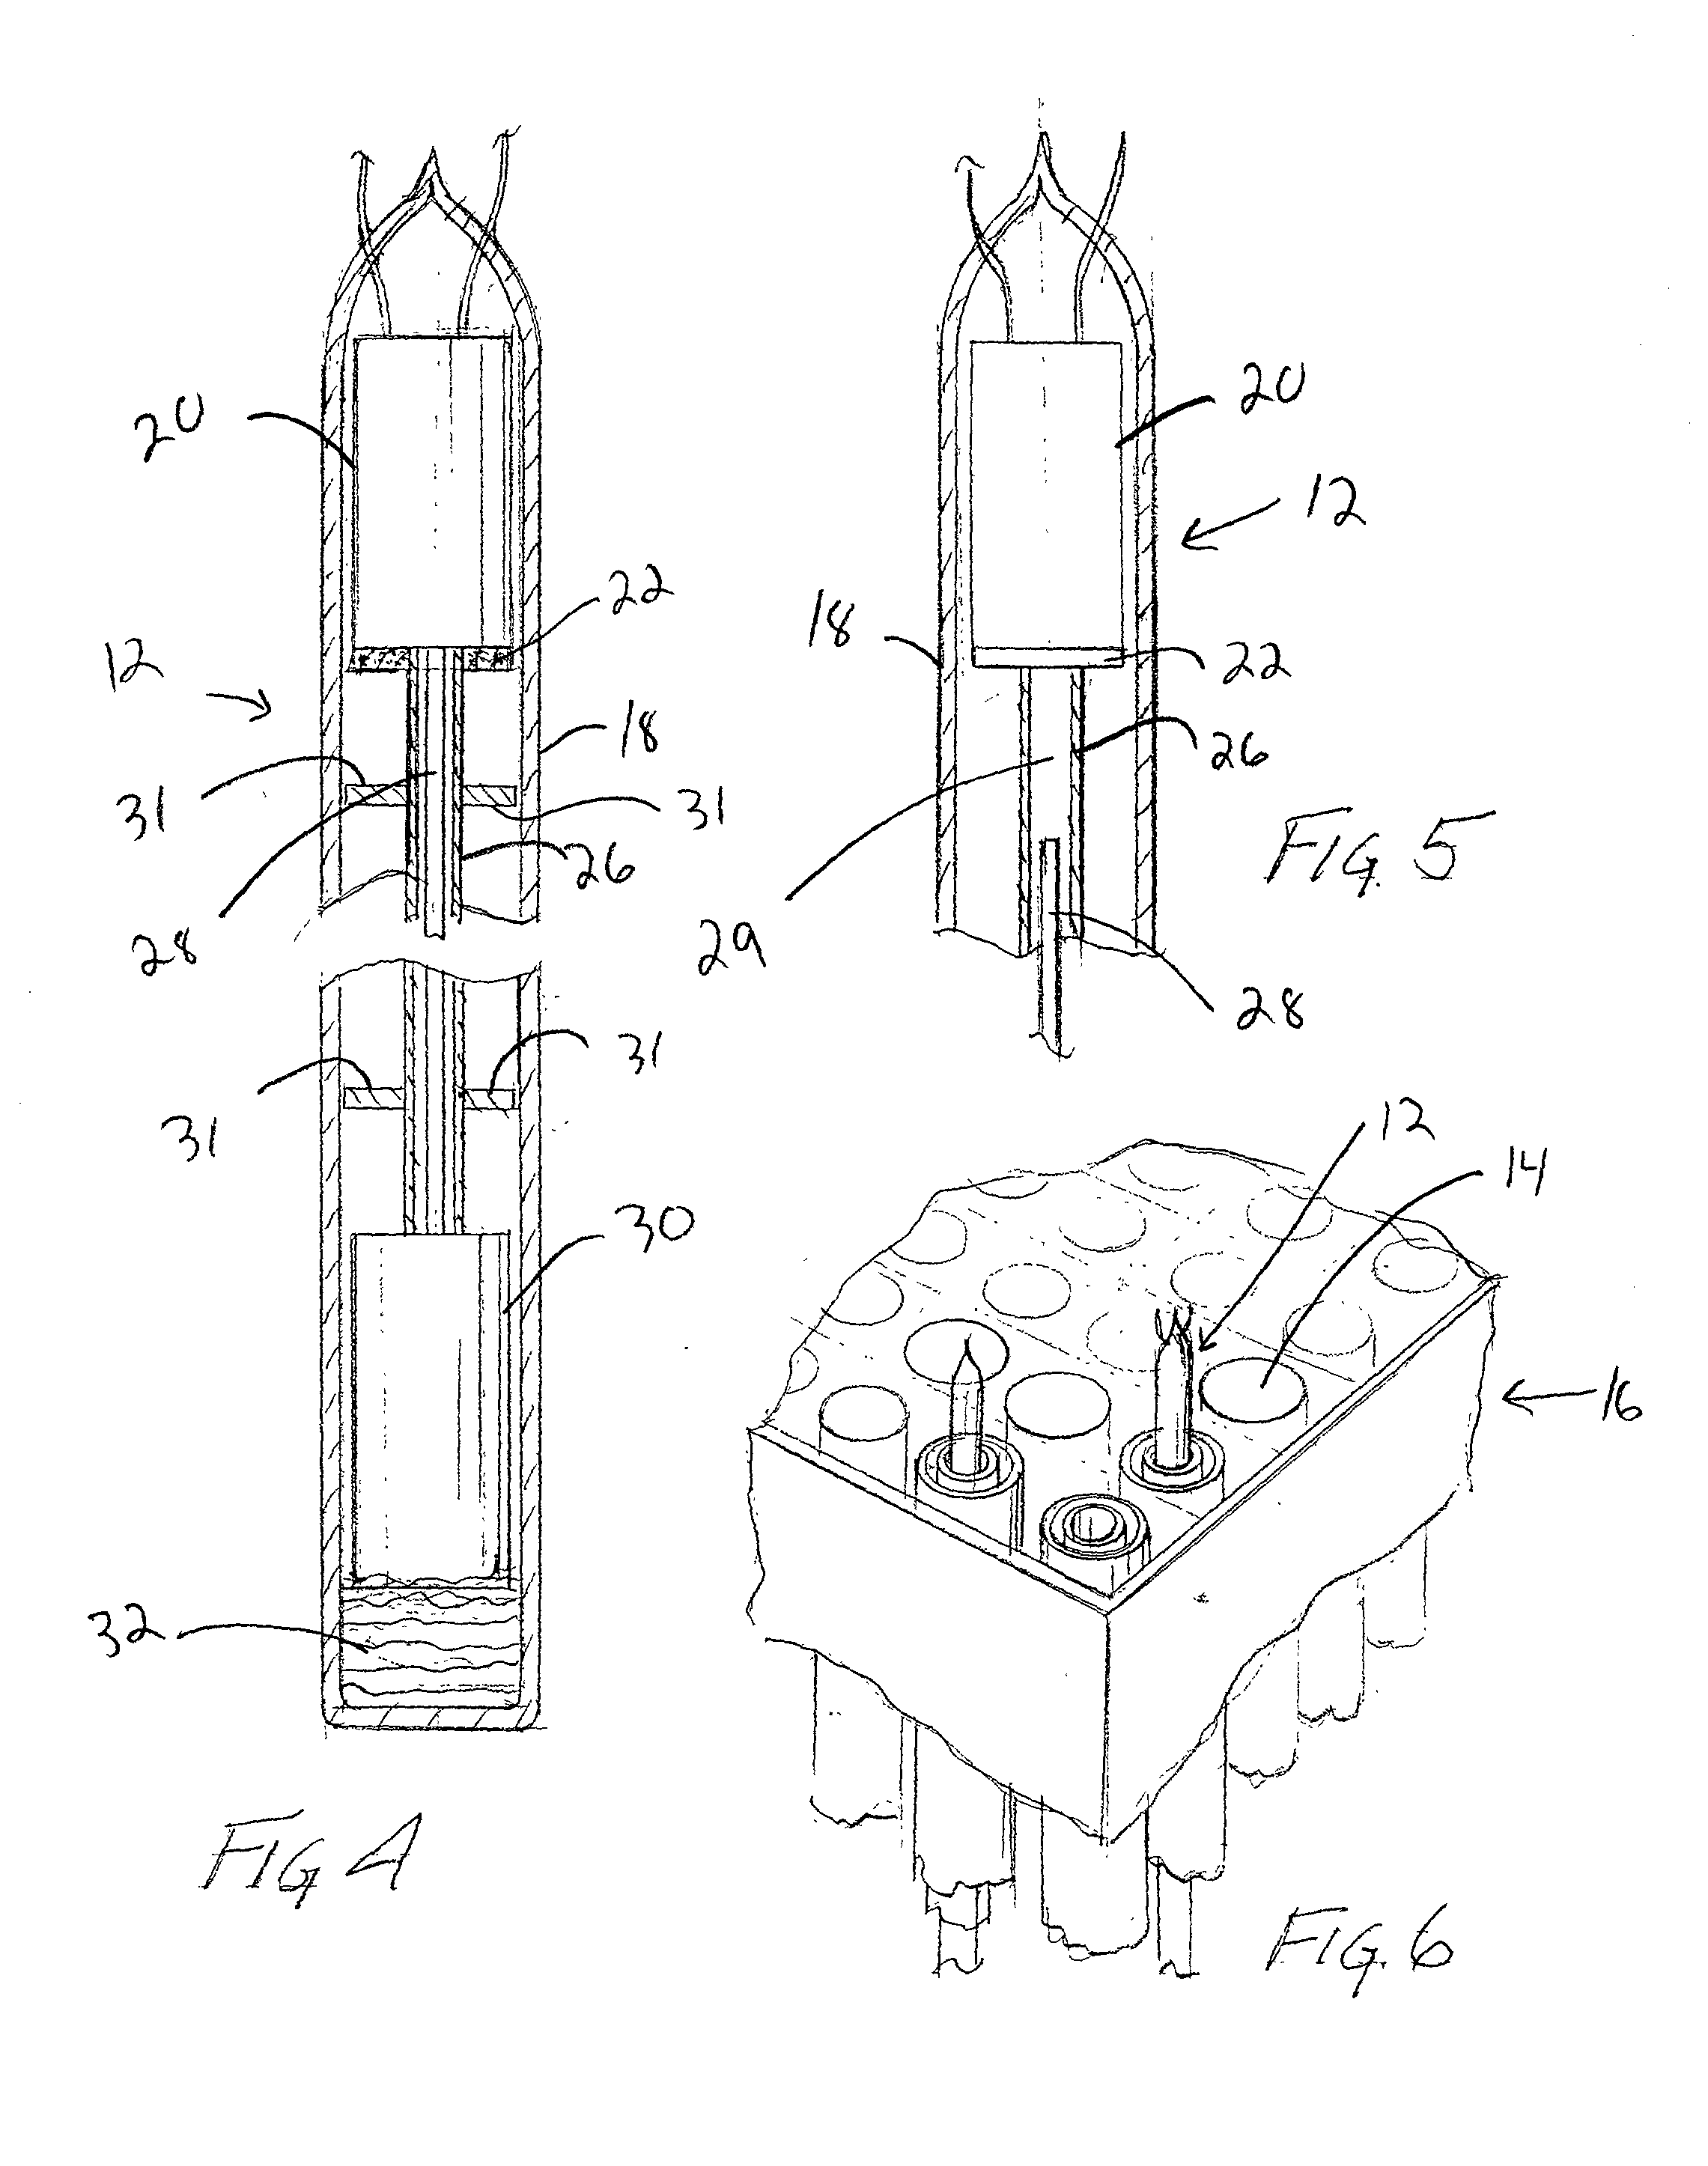 System and method for treating drinking water